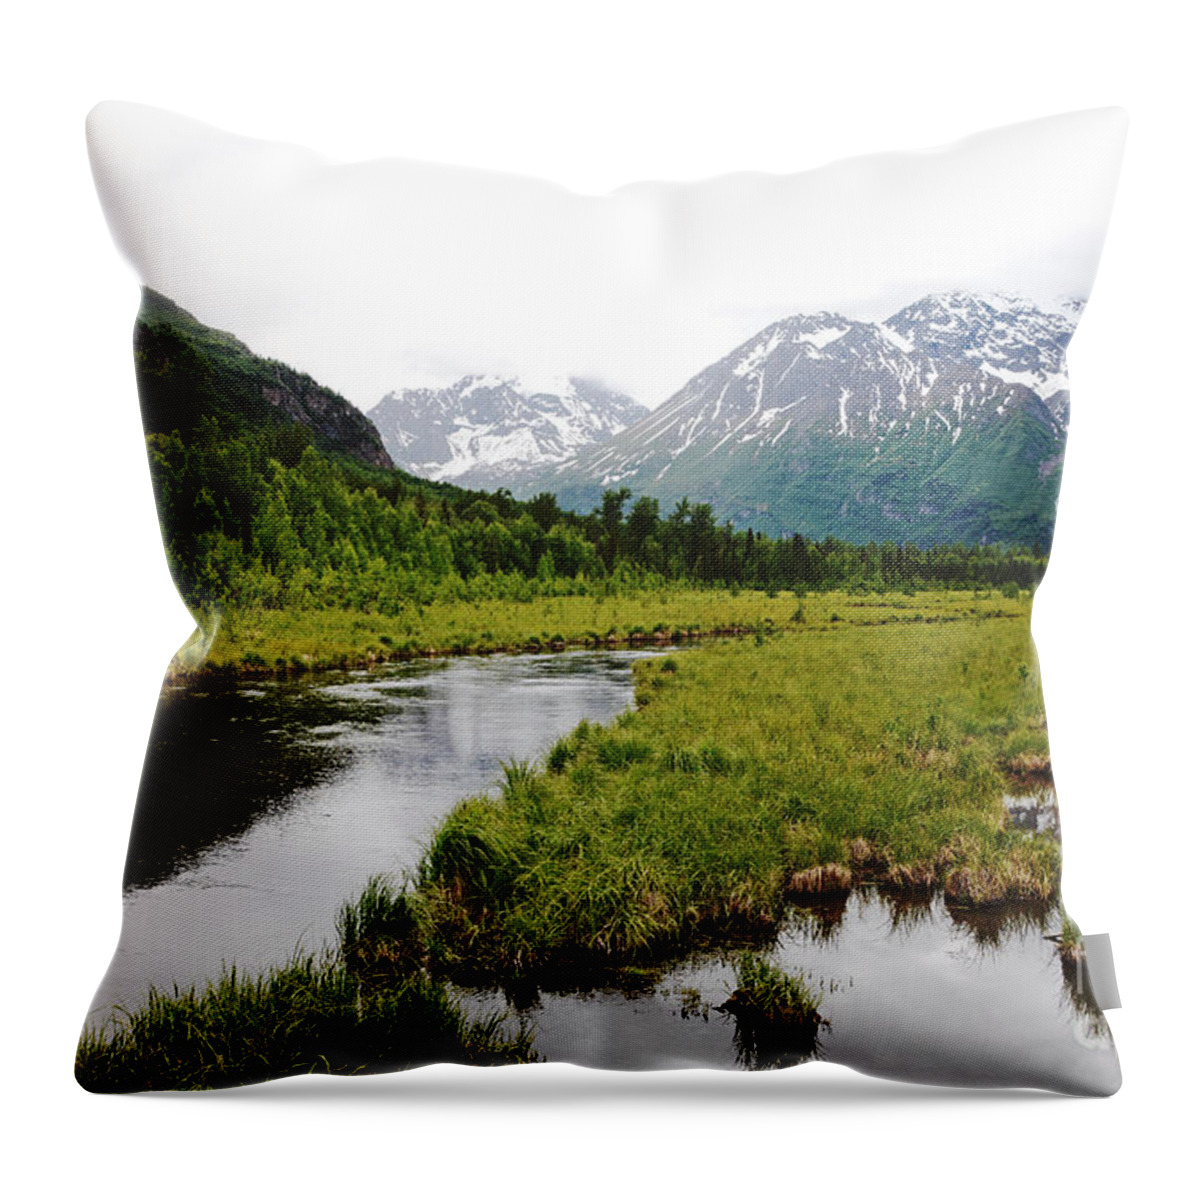 Alaska Throw Pillow featuring the photograph In Road To Denali by Lorenzo Cassina